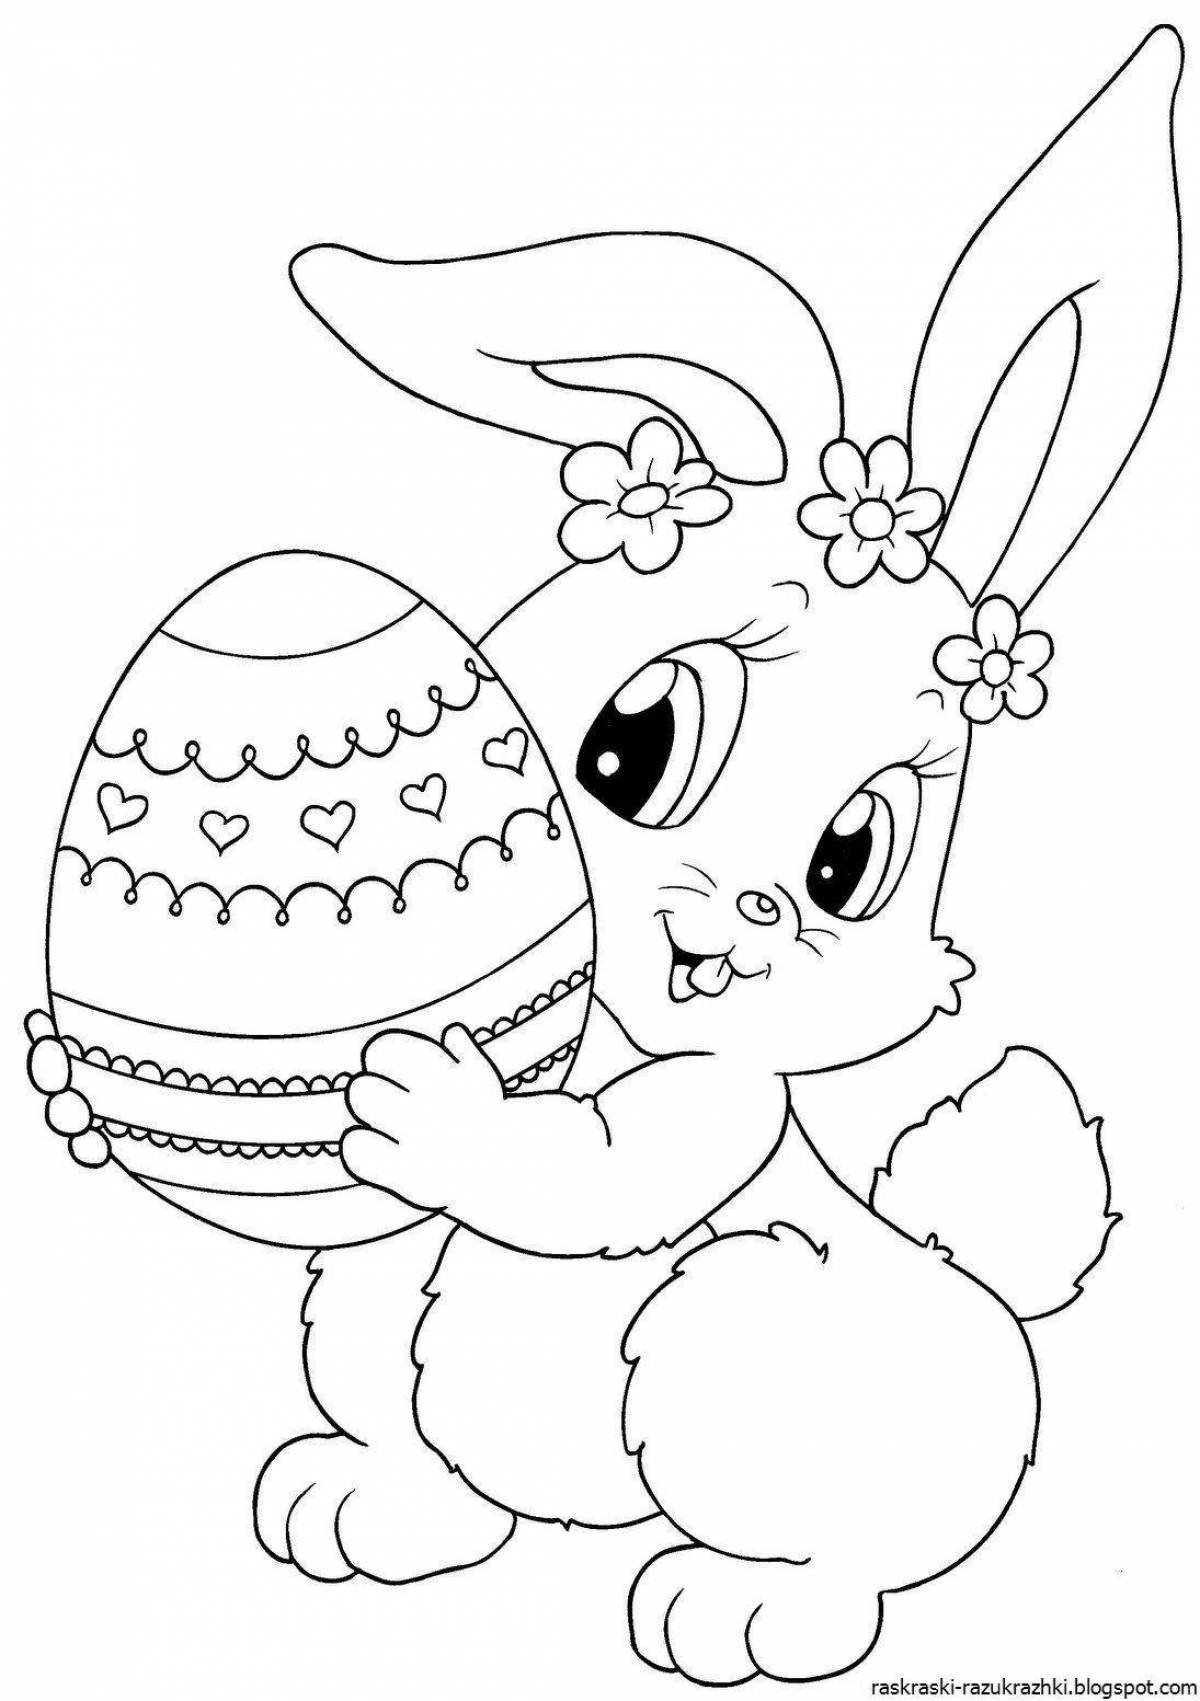 Glowing bunny coloring book